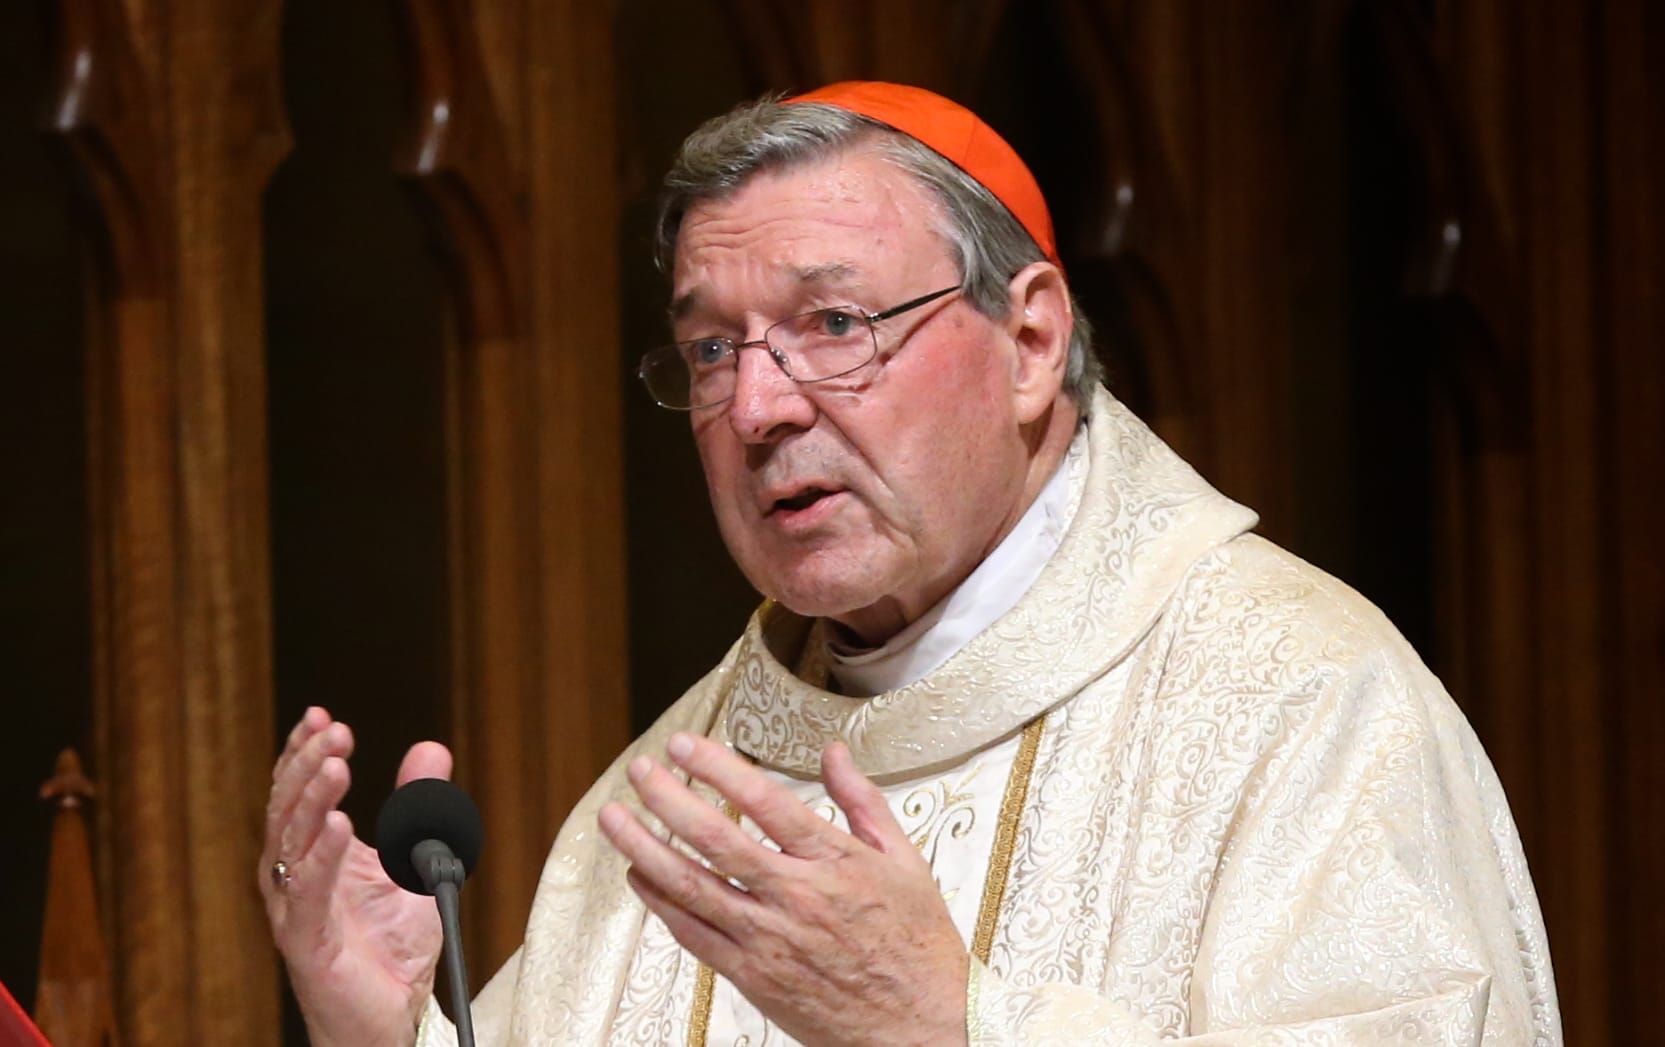 Cardinal George Pell has denied claims he tried to bribe the nephew of paedophile priest Gerald Ridsdale to stay quiet